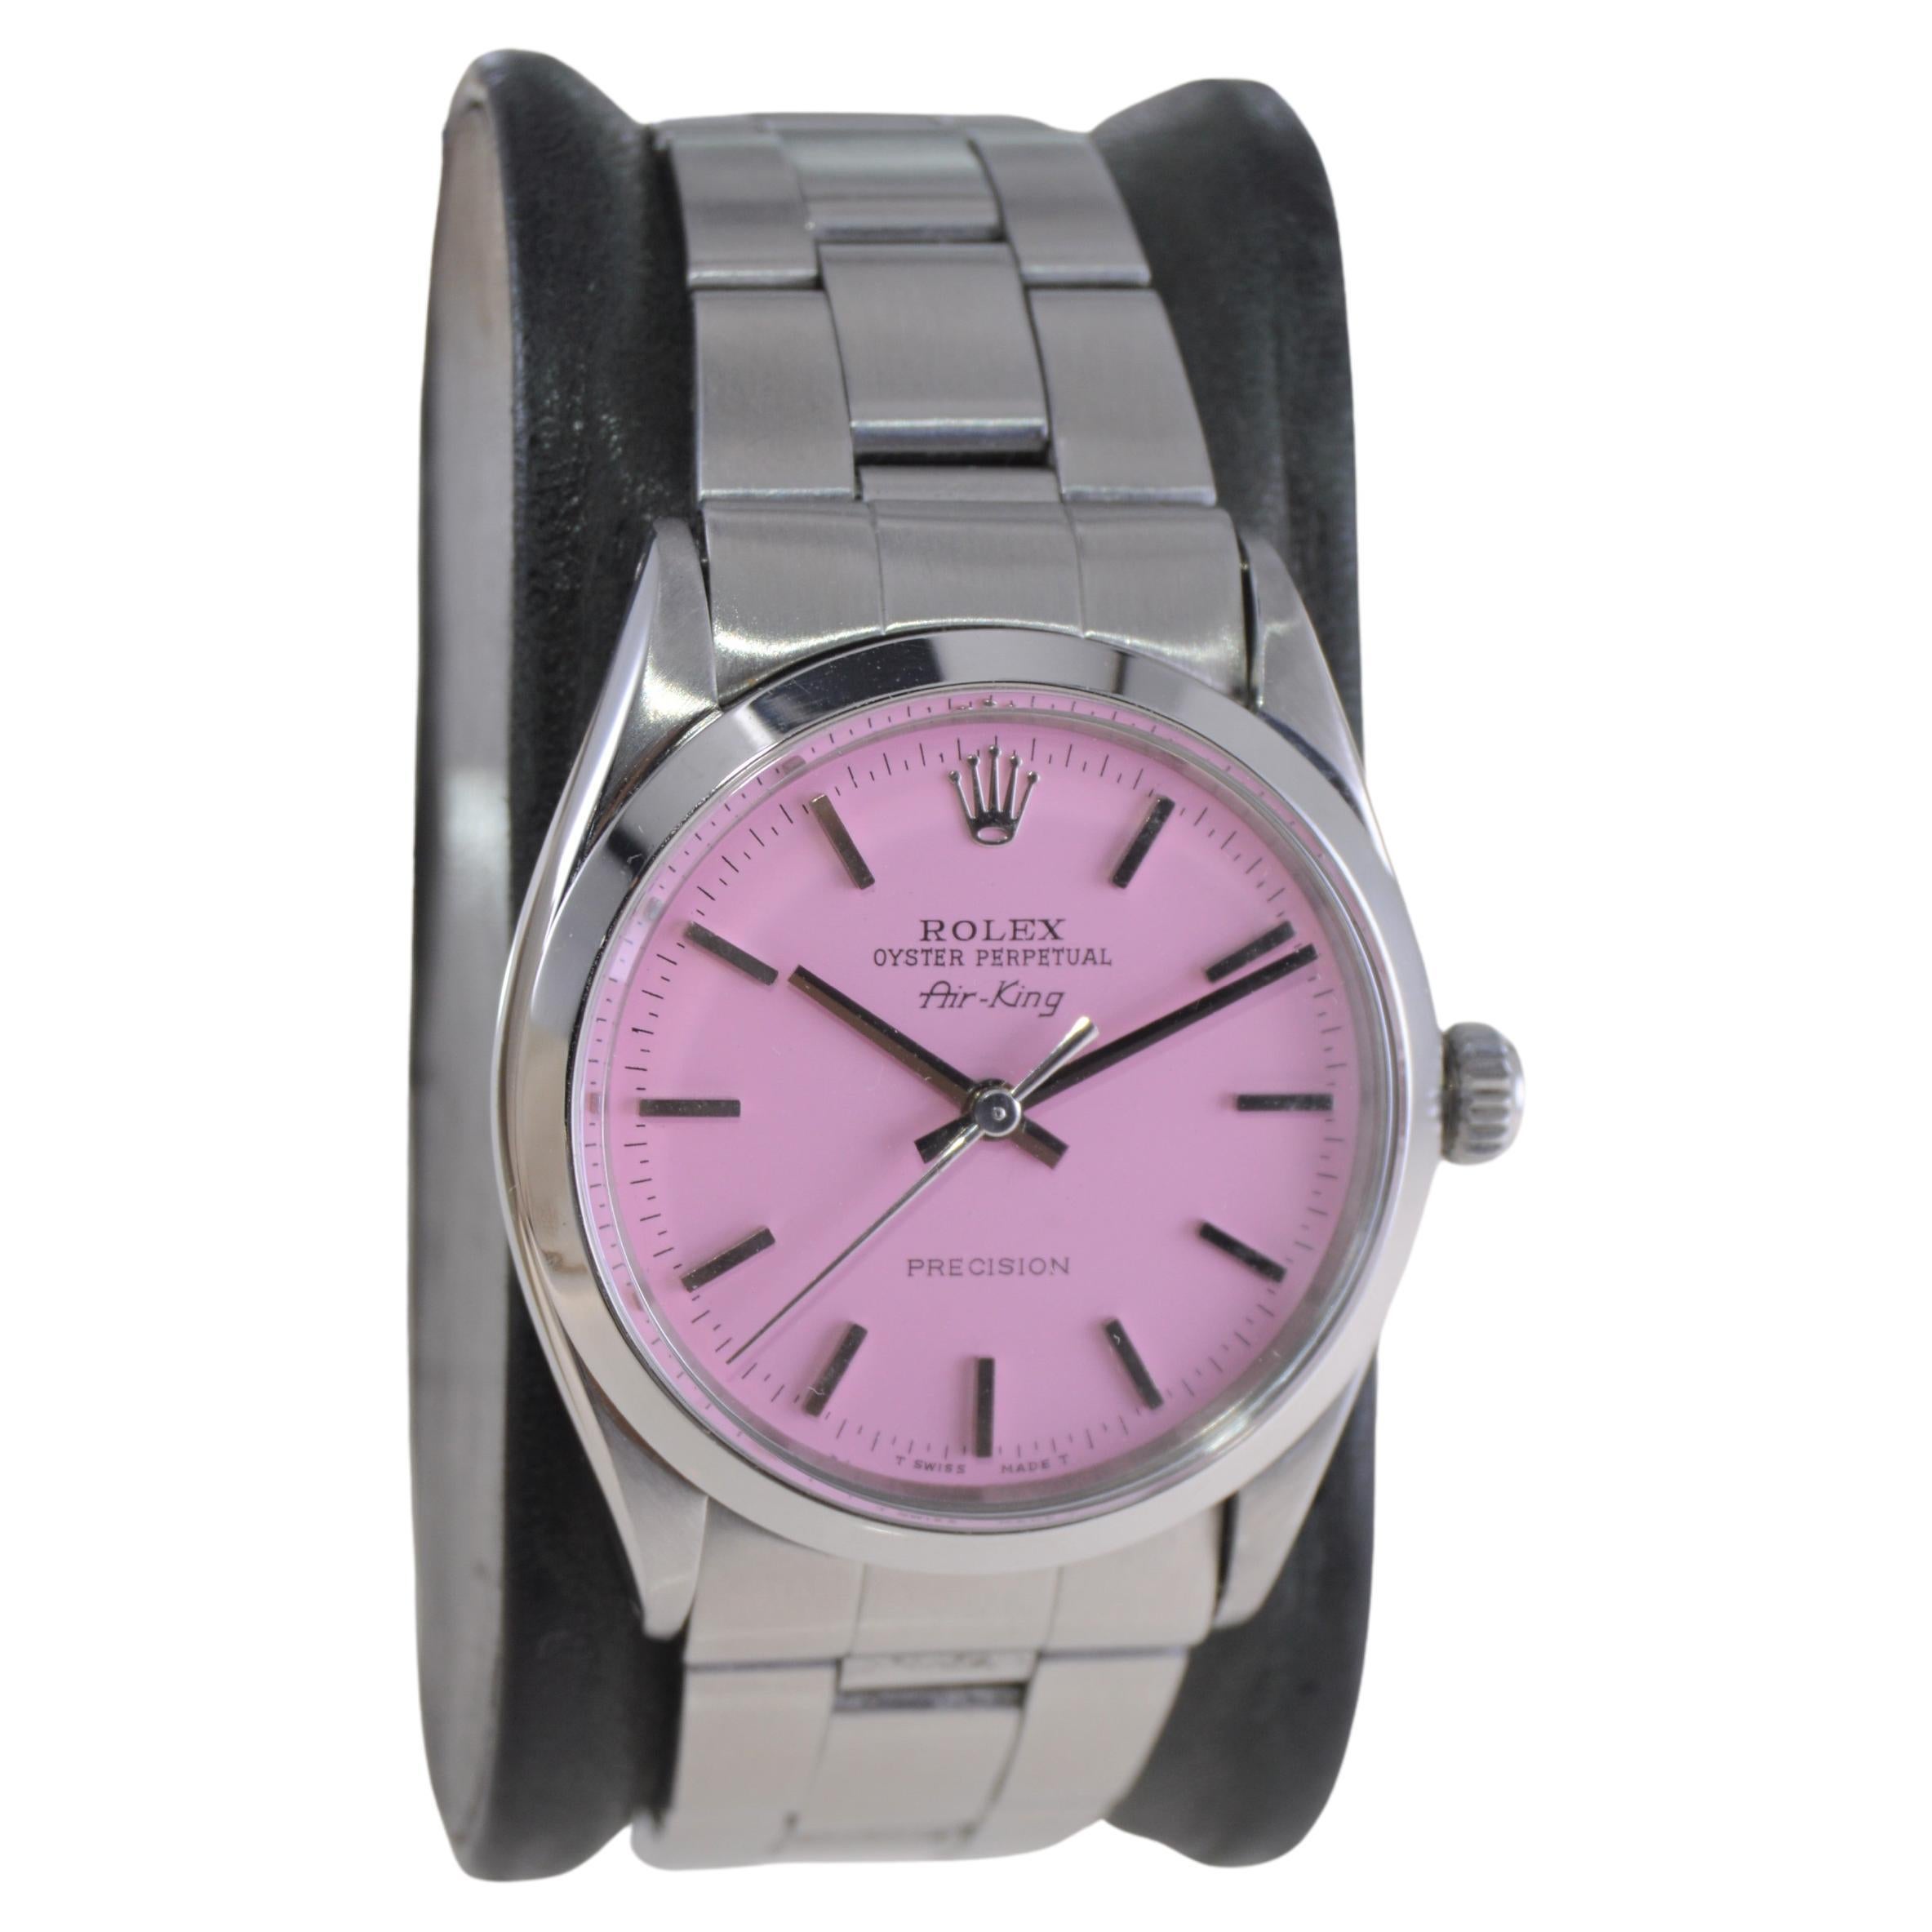 Rolex Stainless Steel Oyster Perpetual Air-King with Custom Pink Dial 1960s In Excellent Condition For Sale In Long Beach, CA